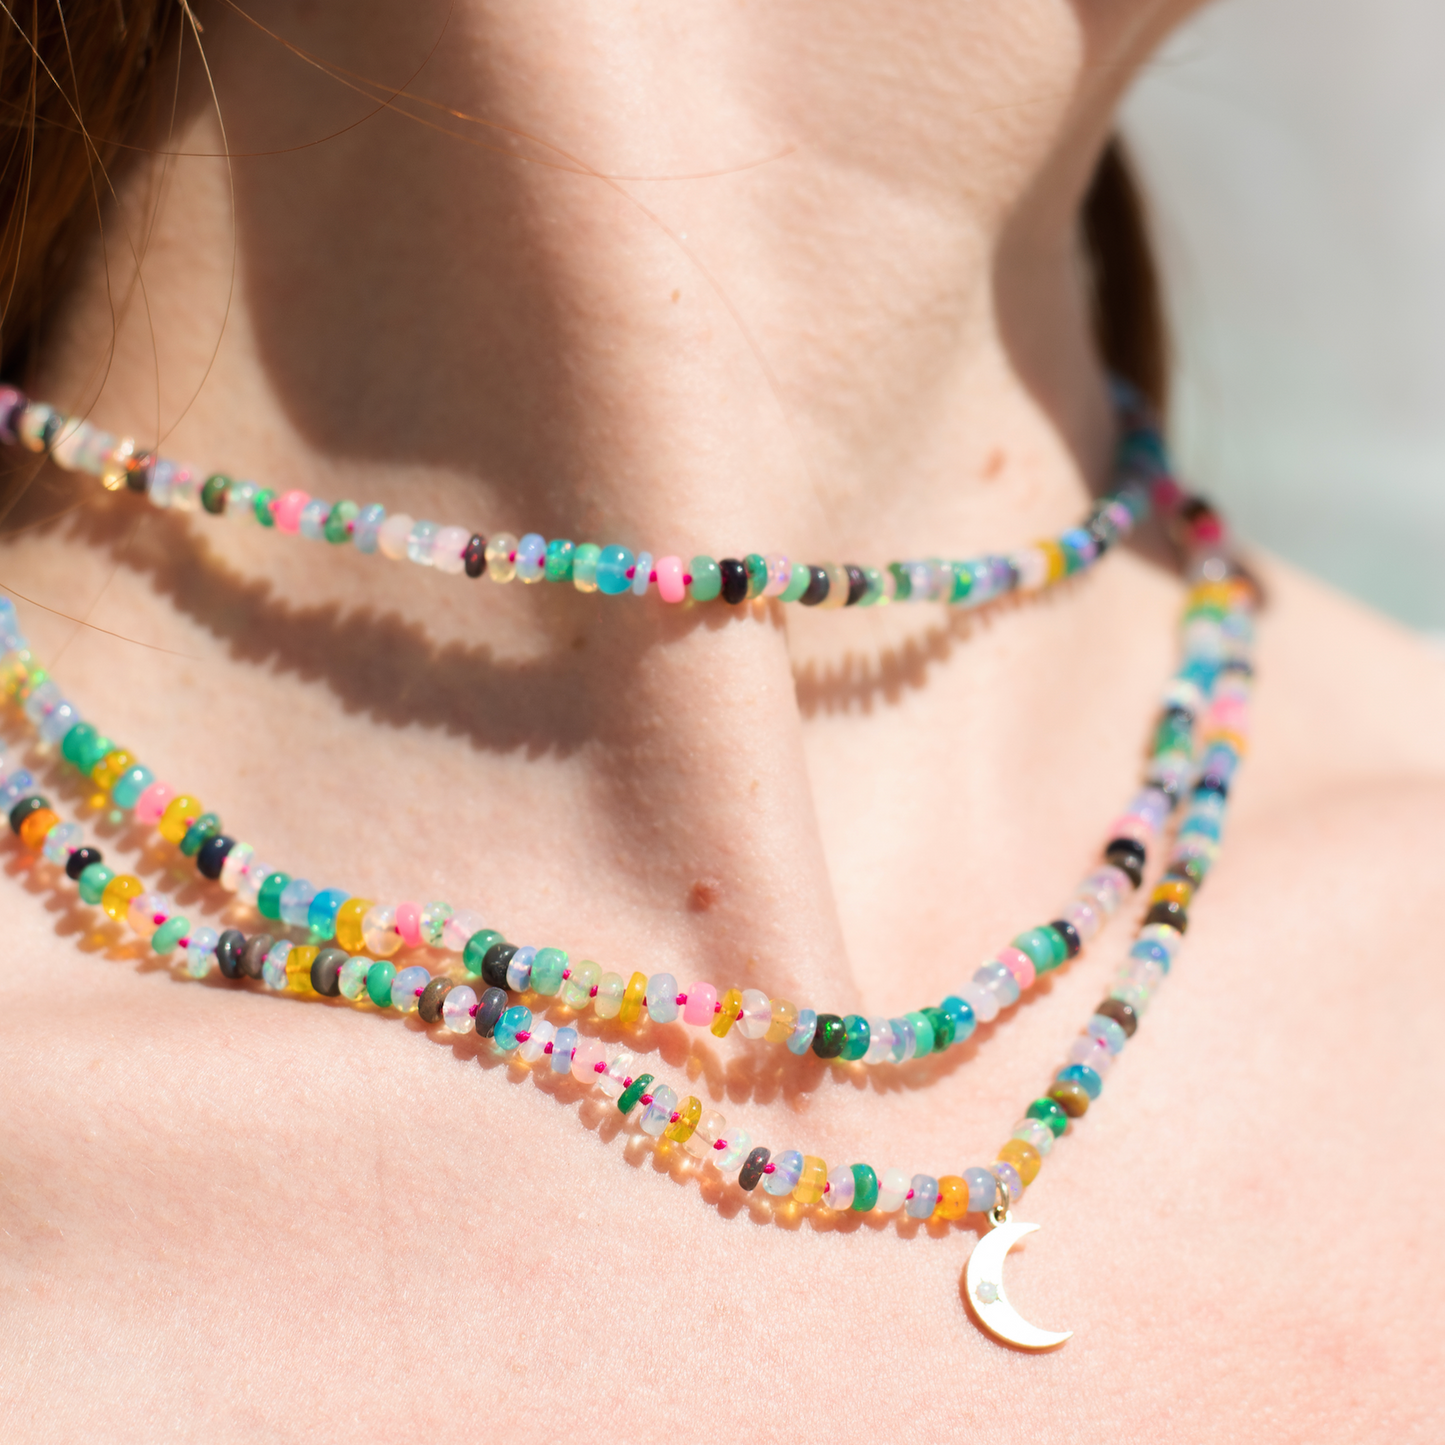 Rainbow Opal Beaded Necklace with Crescent Moon Charm